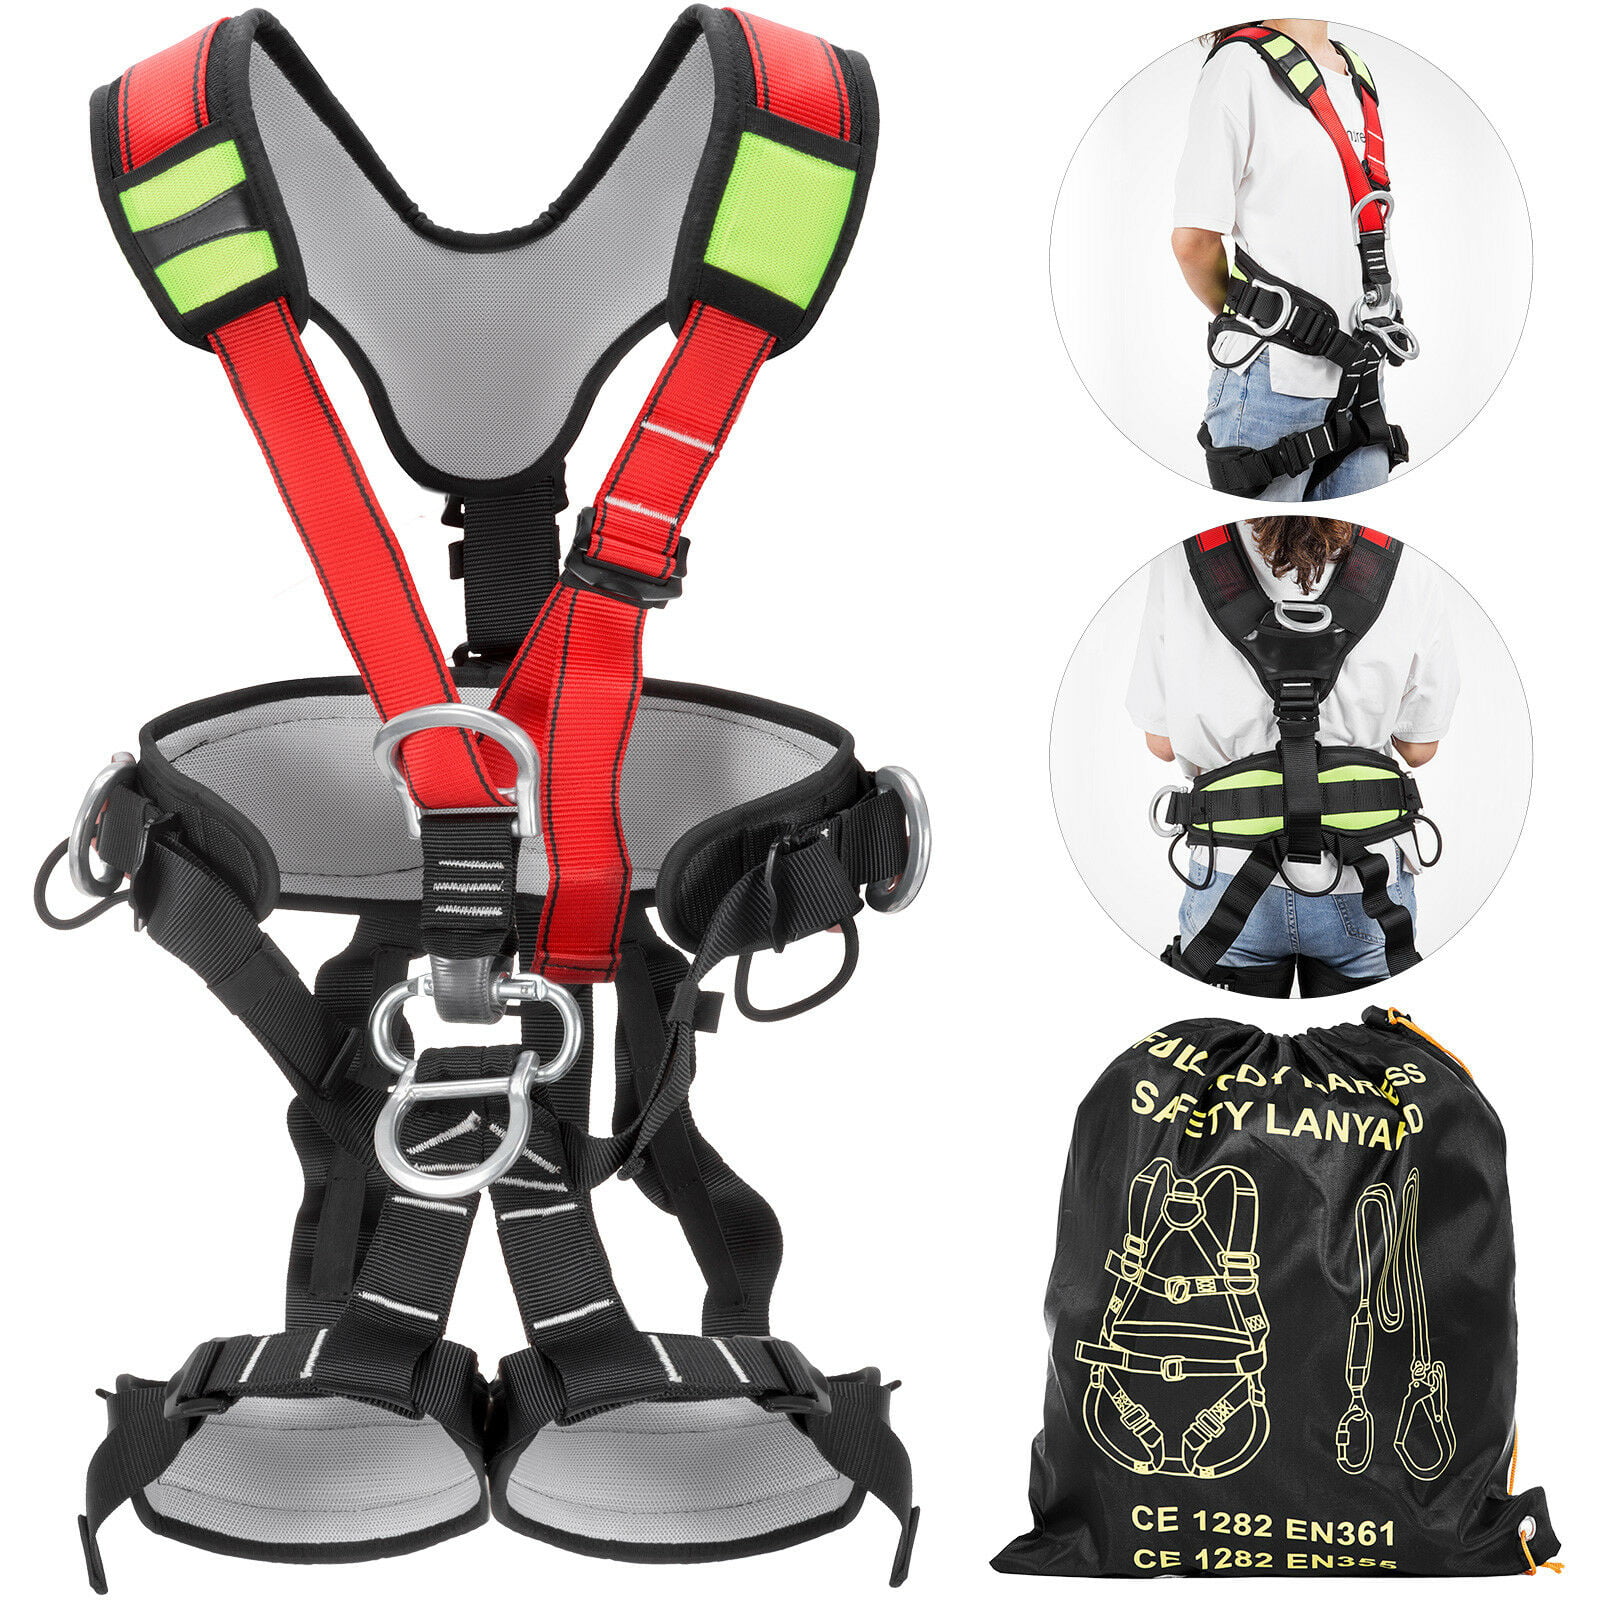 Rescue Climbing Safety Harness Seat Belt Body Protect Support Climbing Gear